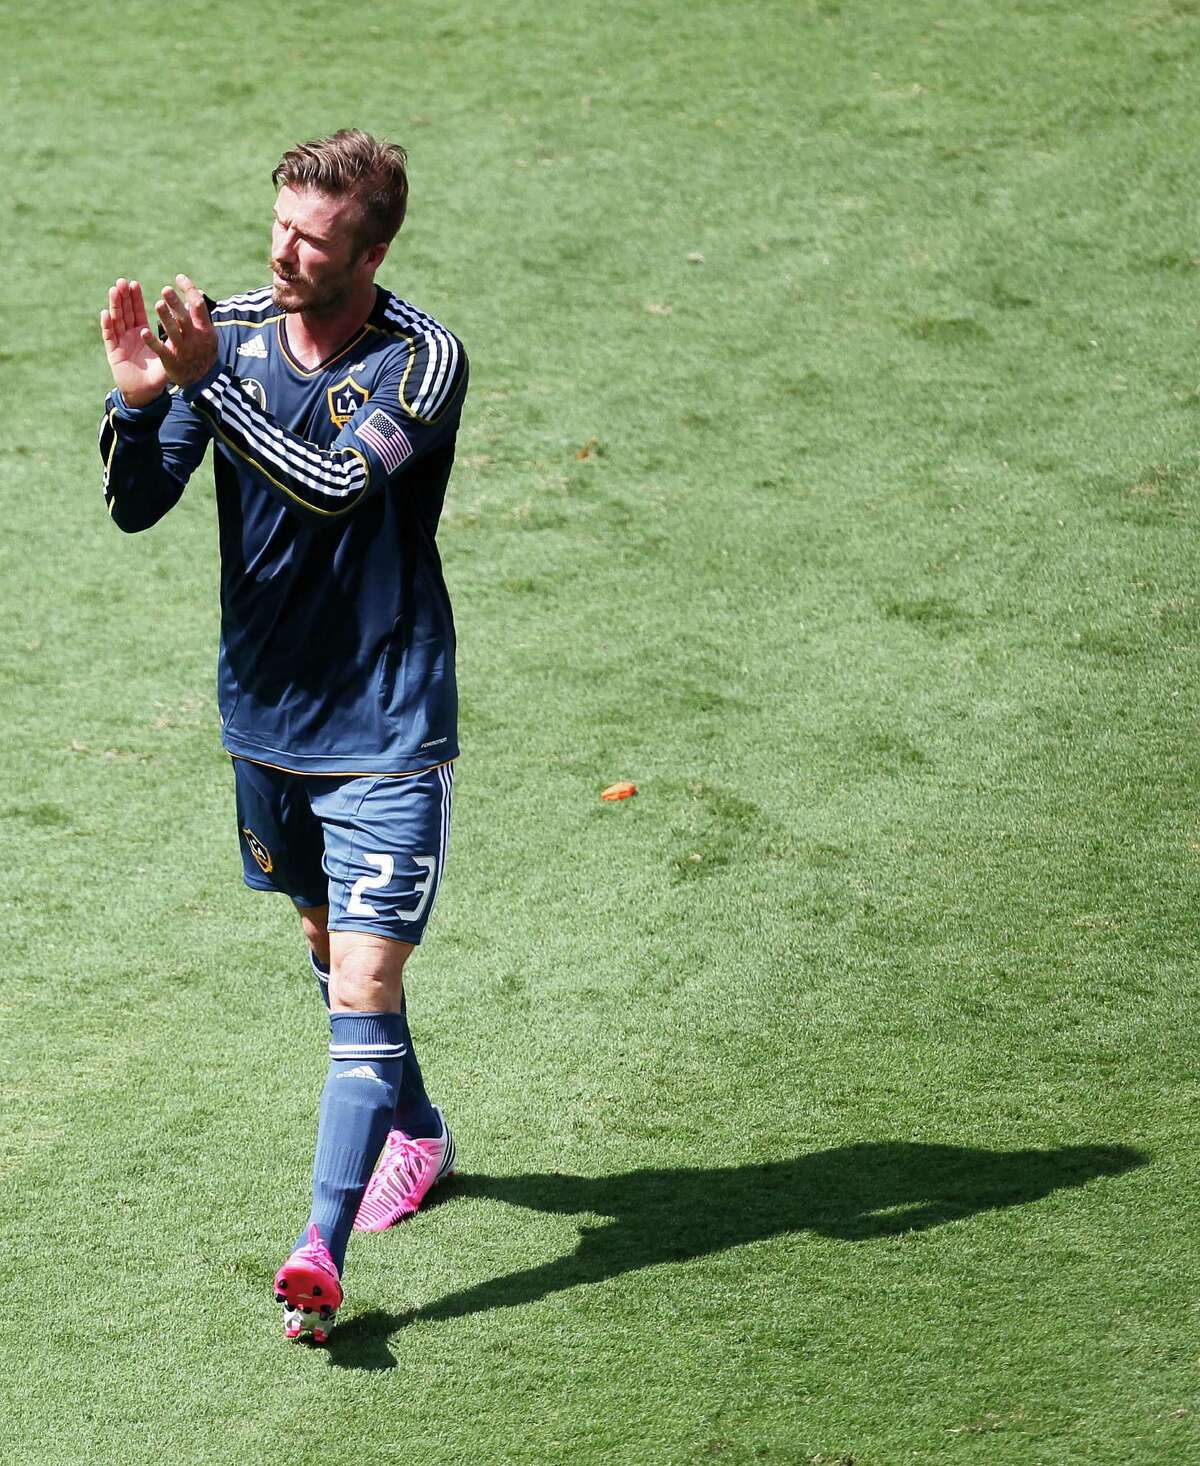 The Los Angeles Galaxy' midfielder David Beckham claps his hands after while leaving the field after the Houston Dynamo defeated the Galaxy 2-1 at BBVA Compass Stadium Saturday, May 26, 2012, in Houston.